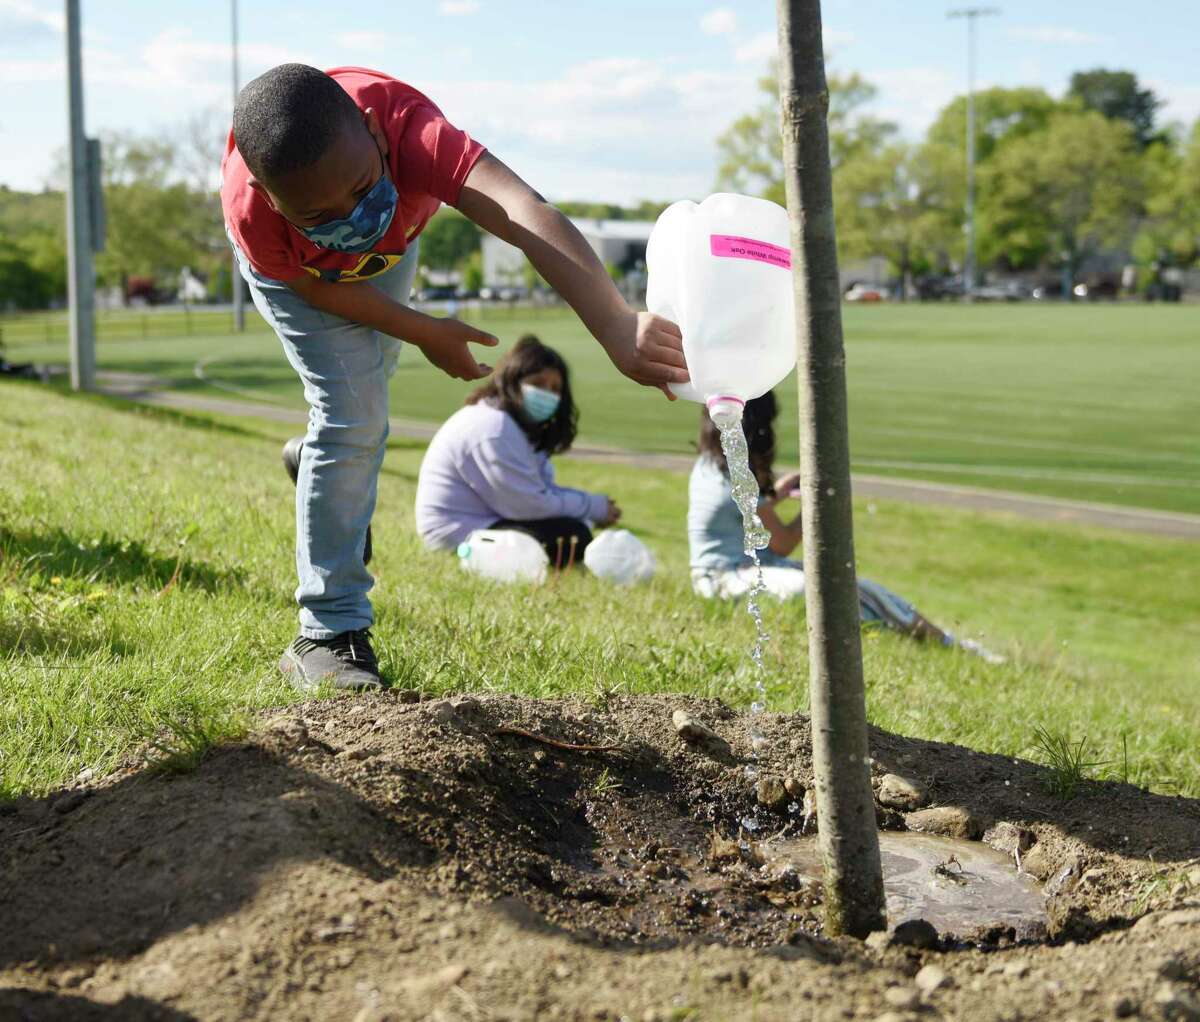 Semir B., 10, waters newly-planted Swamp White Oak trees at Lione Park in Stamford, Conn. Thursday, May 13, 2021. Pollinator Pathway Stamford planted 37 new trees in four Stamford parks starting on Earth Day of this year to help create corridors of pollinator-friendly habitat throughout the northeast. With the help of the Boys & Girls Club of Stamford, the new Red Maples and Swamp White Oaks will be watered by Keystone Club and STEM students.